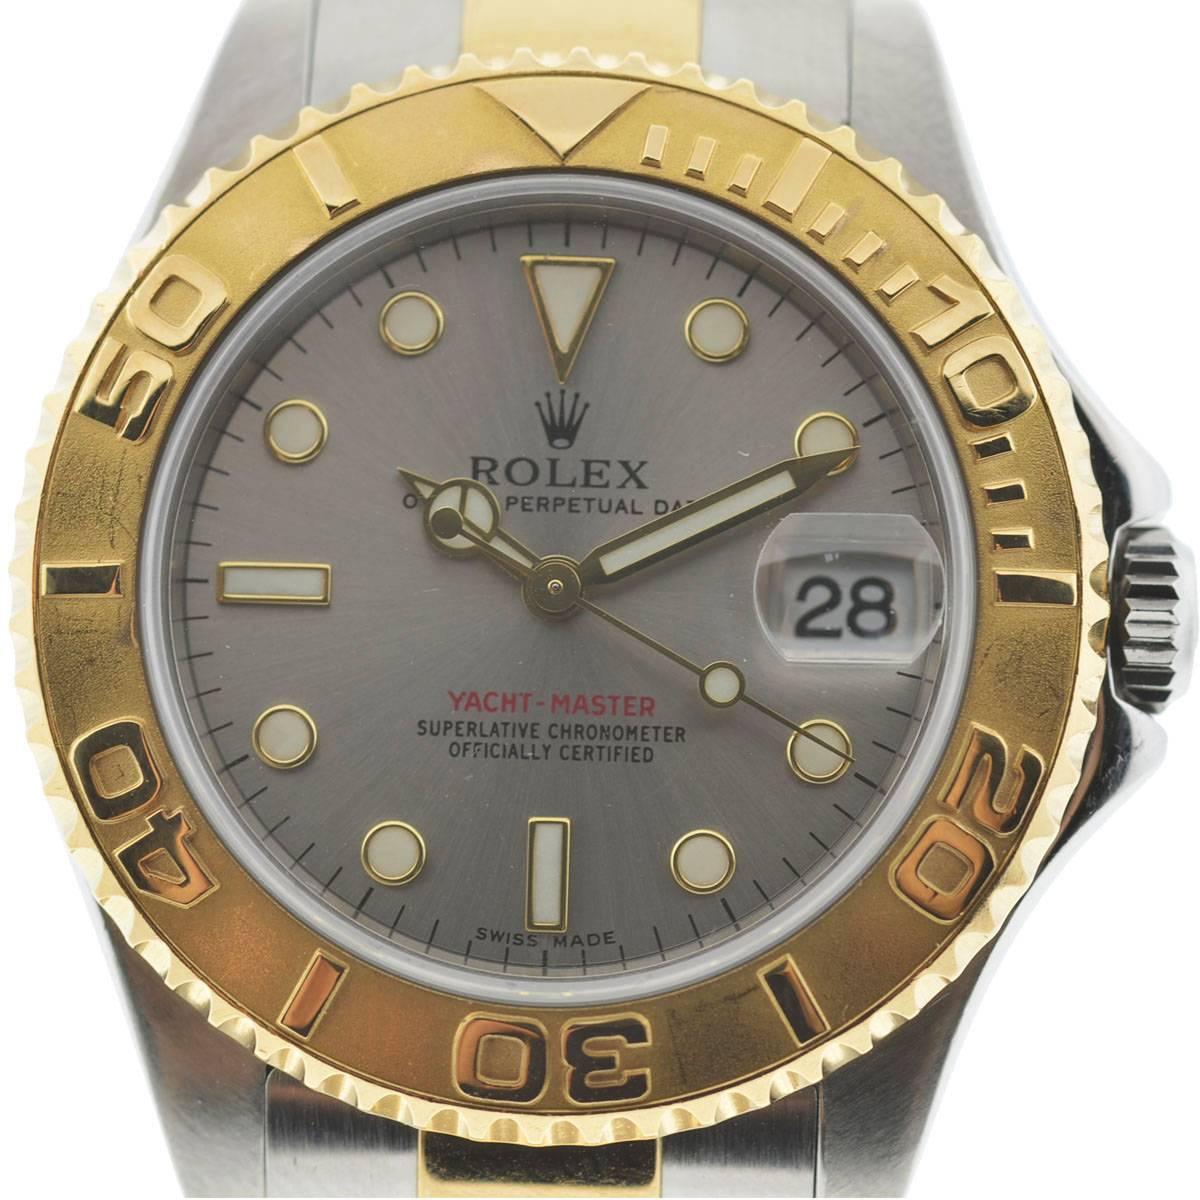 Company -Rolex
Model - Yachtmaster
Case Metal - Stainless Steel
Case Measurement - 35mm
Bracelet -18ct Gold/Stainless Steel
Dial -Silver
Bezel - 18k Yellow Gold
Crystal - Scratch Resistant Sapphire
Movement -Automatic
Features -Date, Hours, Minutes,